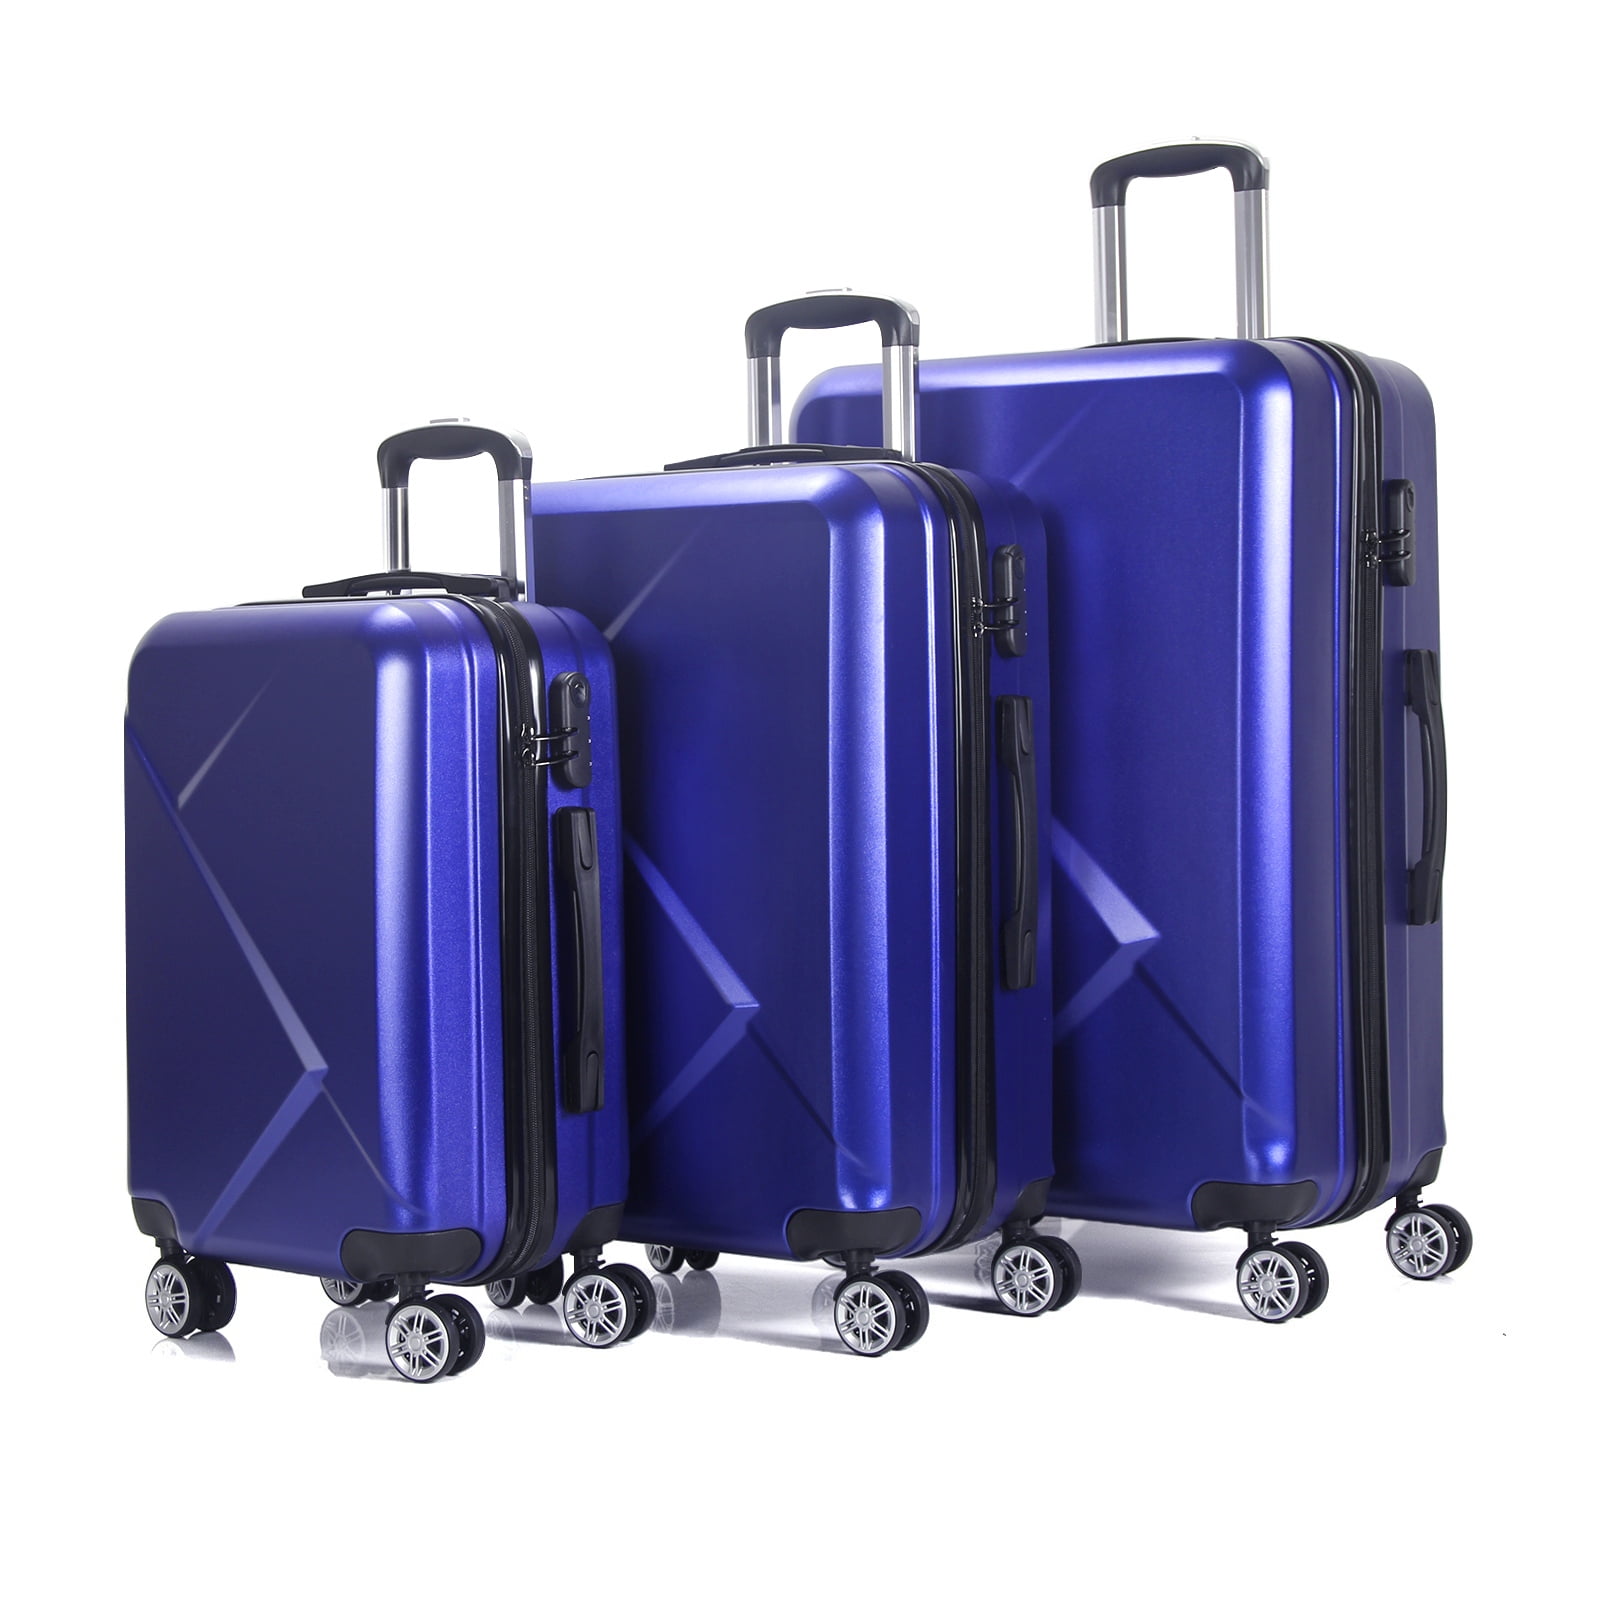 3 Piece Luggage Sets with Hardside Expandable Spinner Wheel